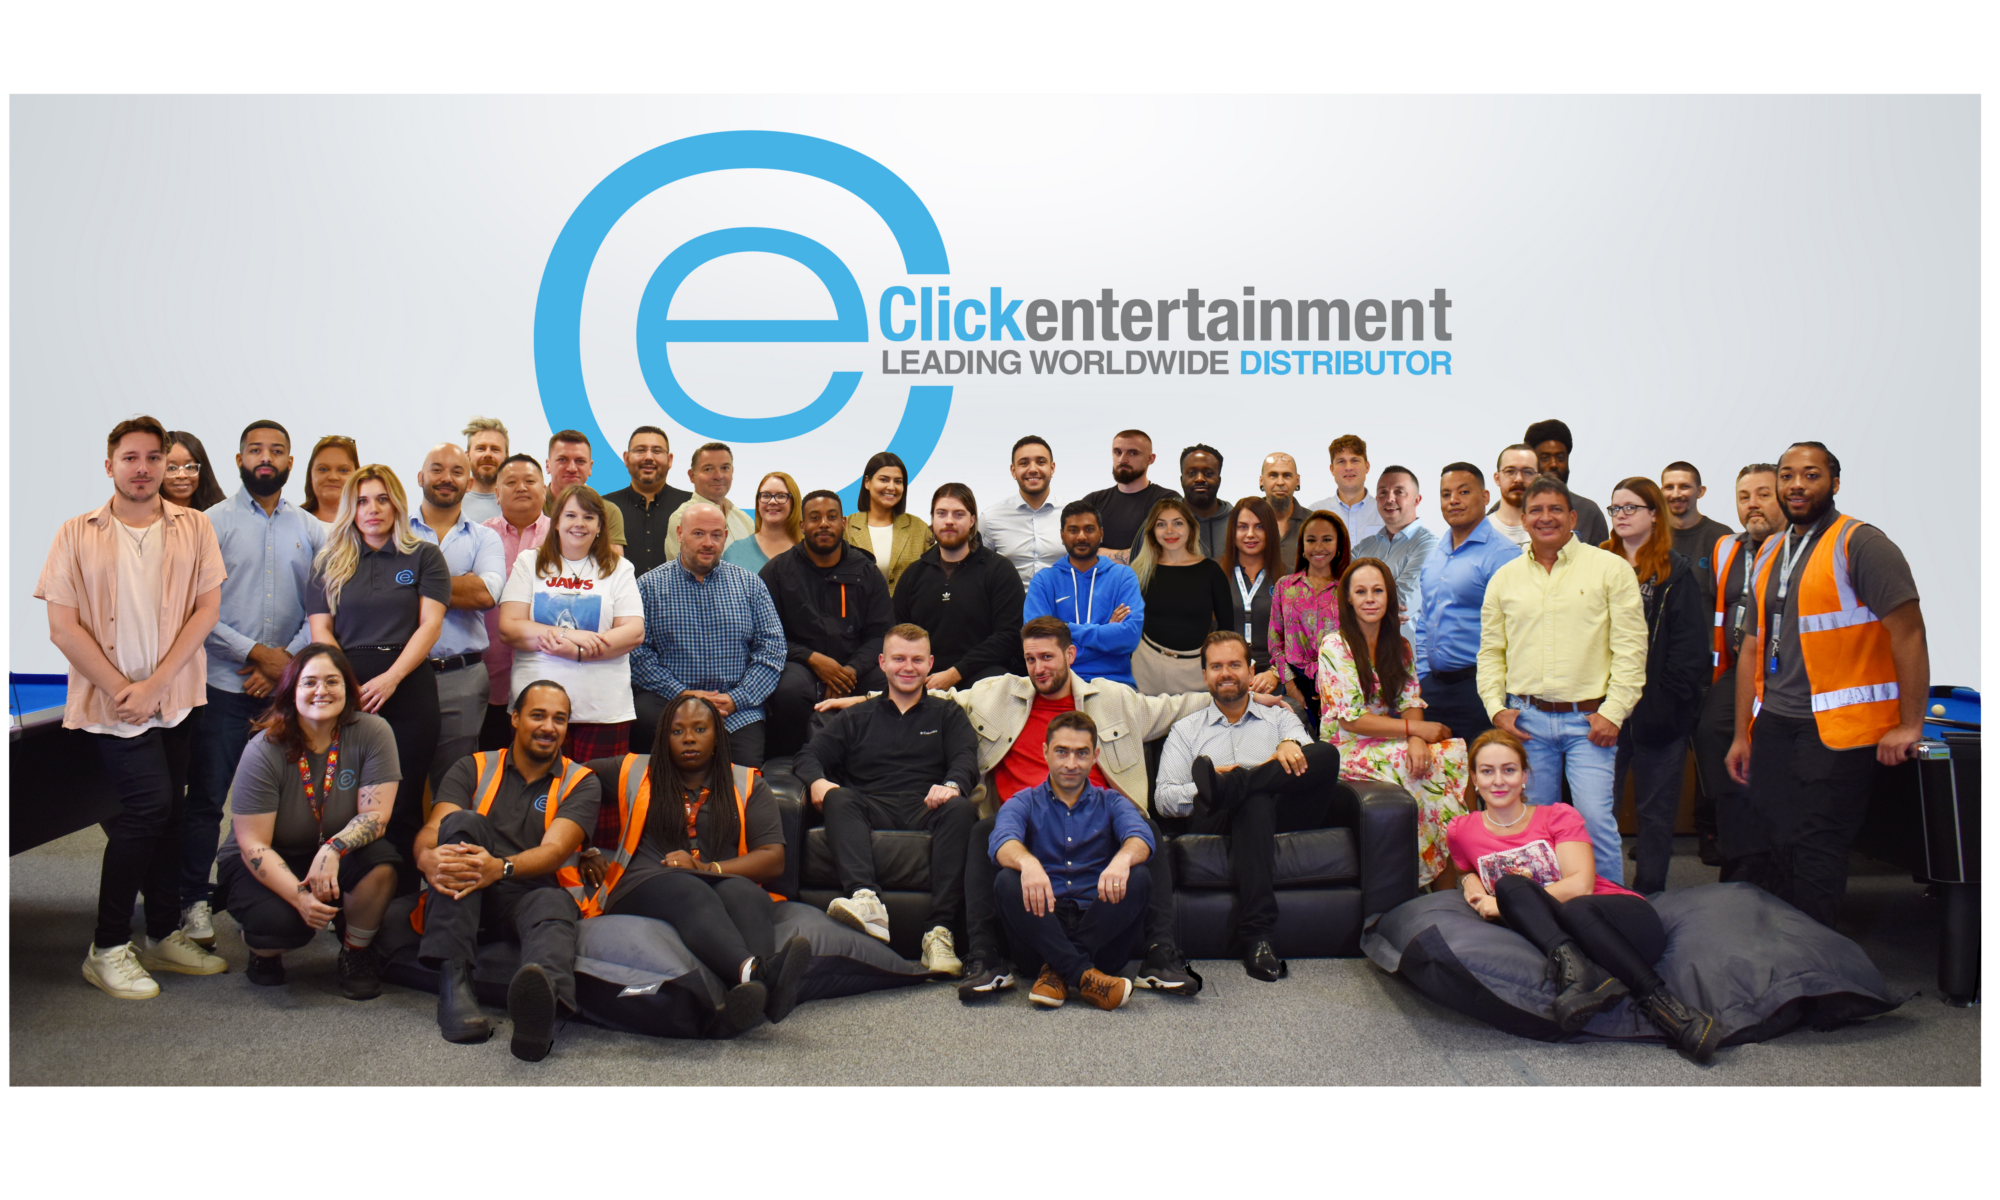 around 30 people, all click entertainment epmployees, gathered in front of a white wall.